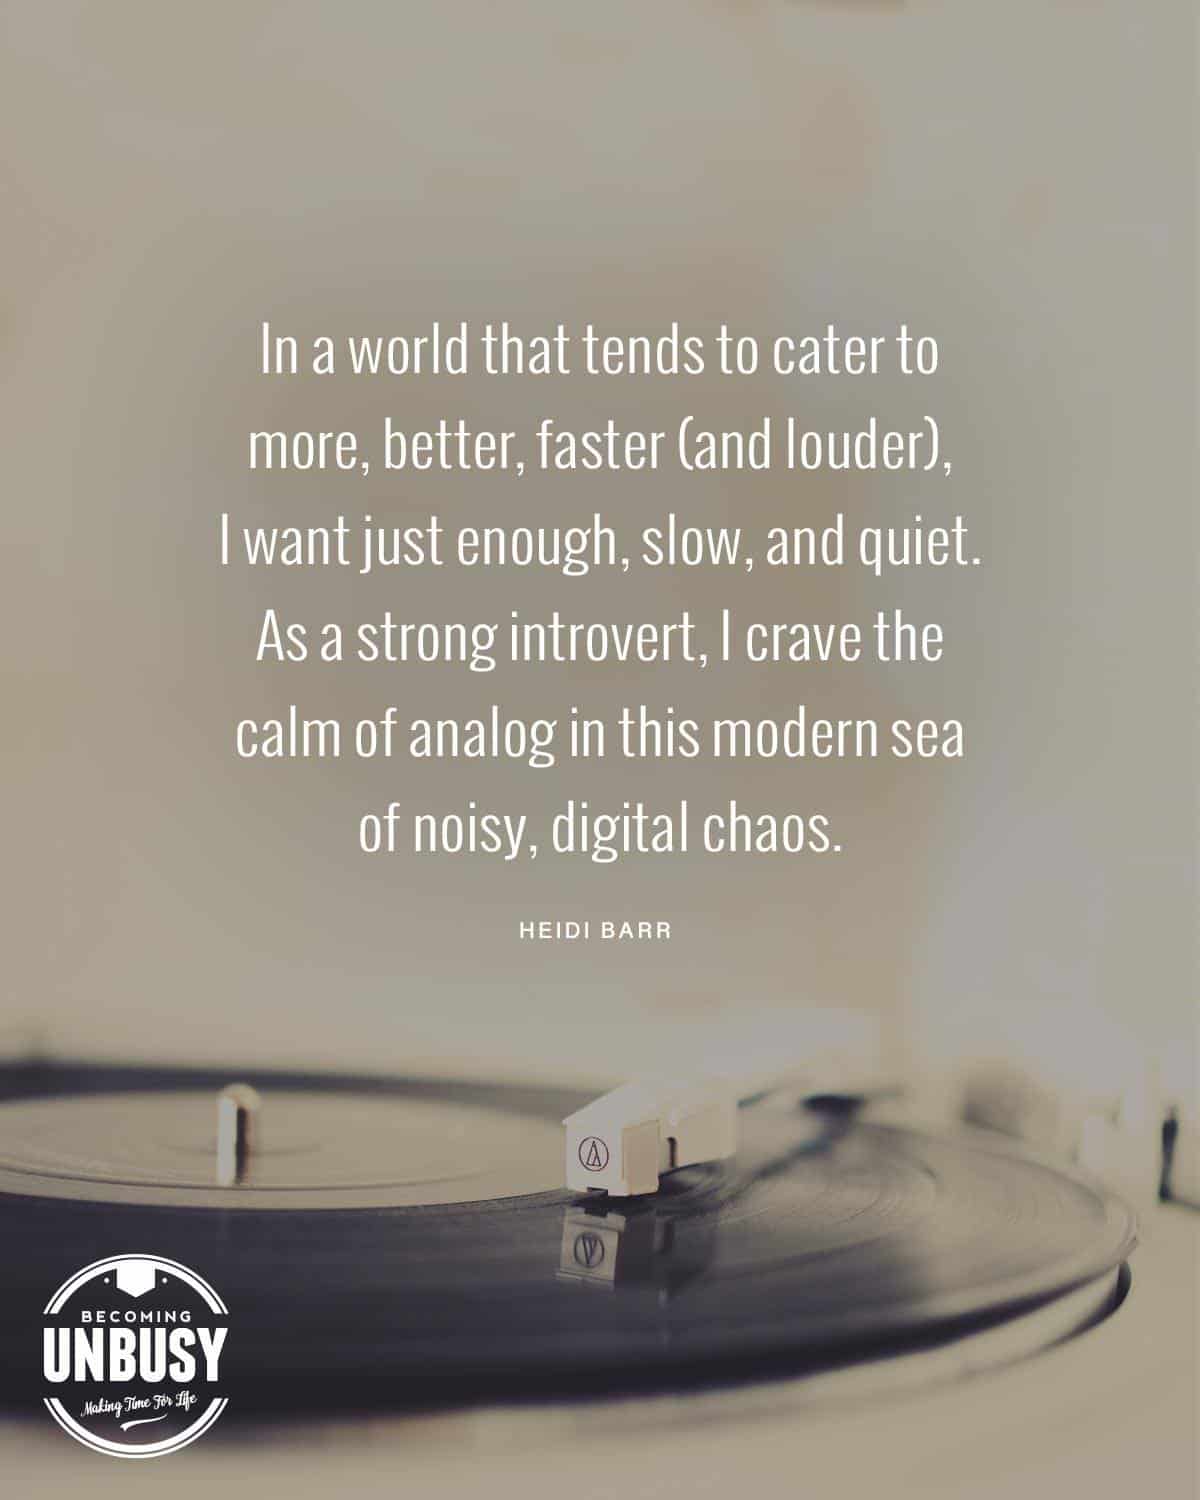 A picture of a record player with the quote, "In a world that tends to cater to more, better, faster, (and louder), I want just enough, slow, and quiet. As a strong introvert, I crave the calm of analog in this modern sea of noisy, digital chaos.